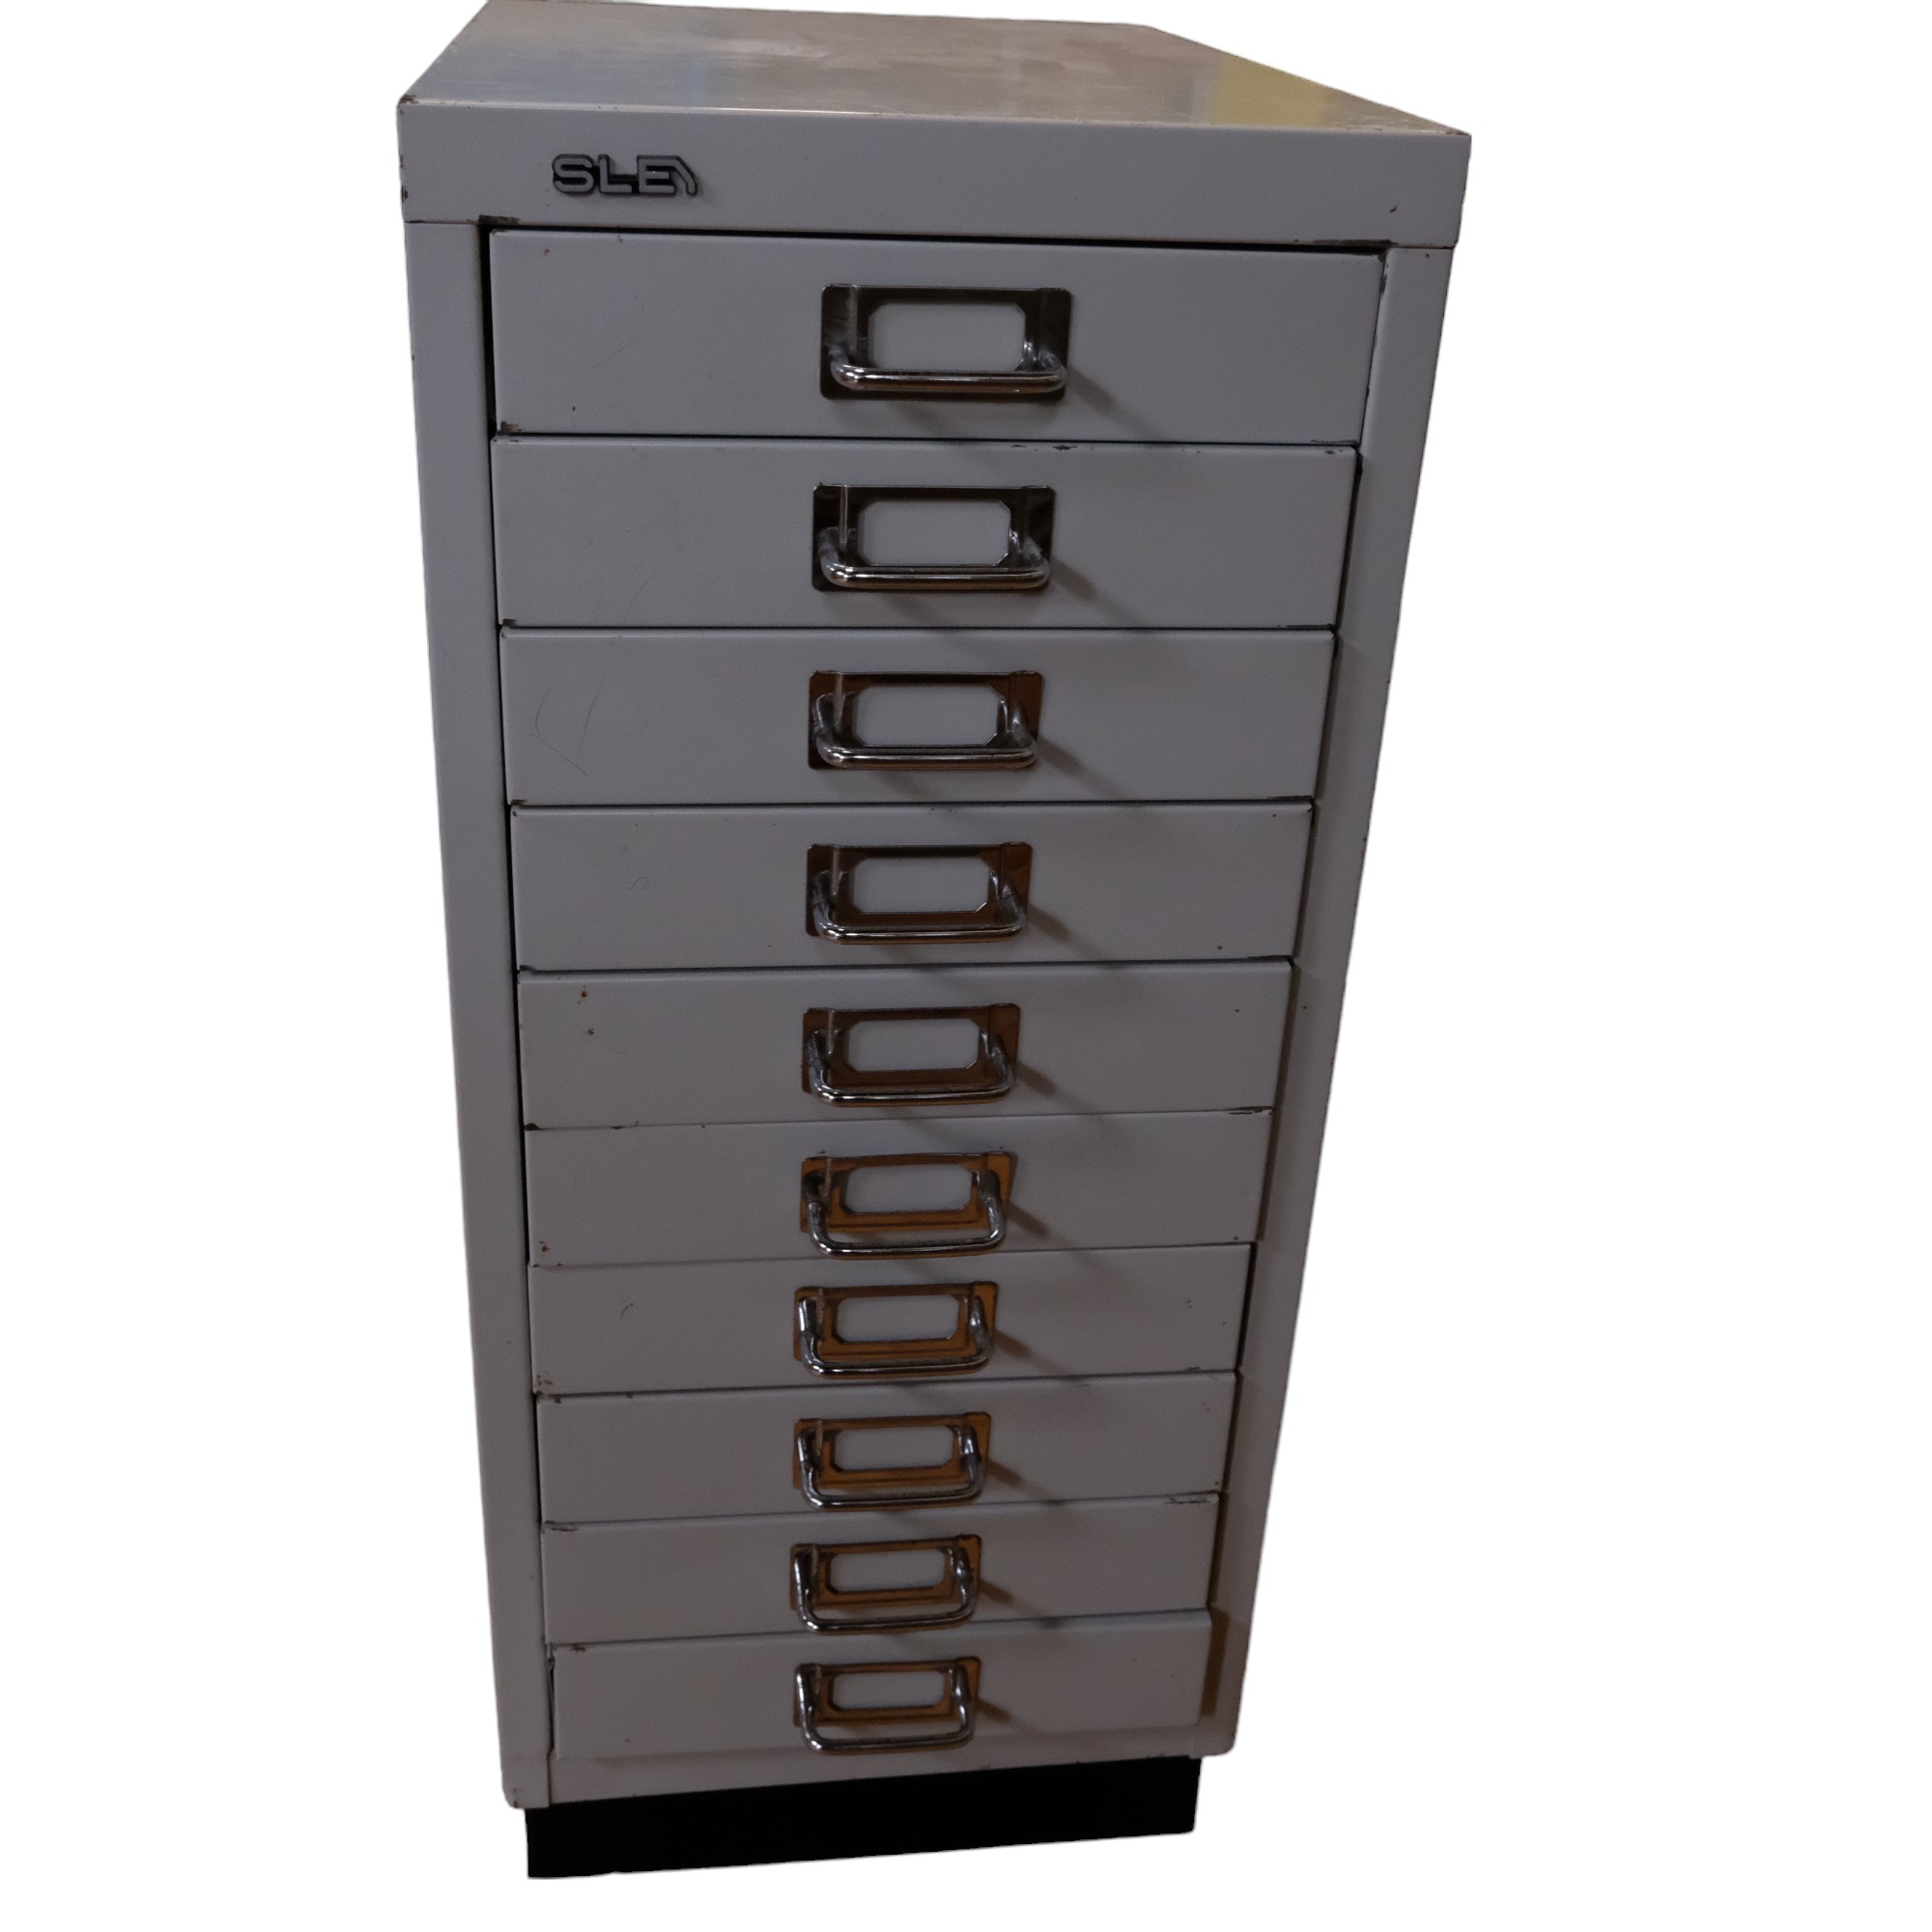 A set of Bisley steel stationery drawers, 28 cm x 41 cm x 67 cm - Image 2 of 3